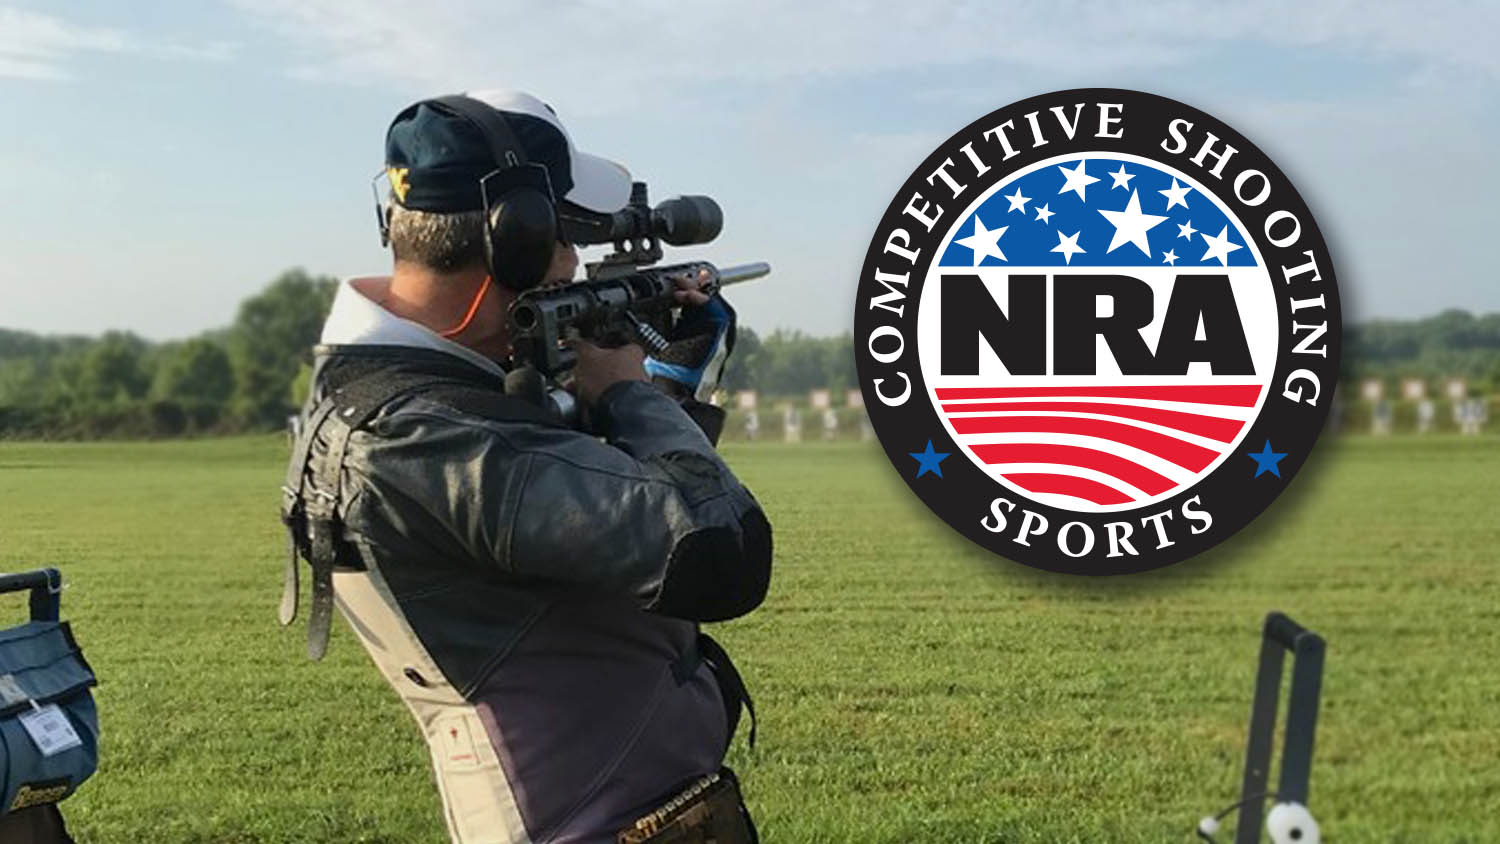 NRA Competitive Shooting Division Building A Bright Future For Proud Shooting Traditions